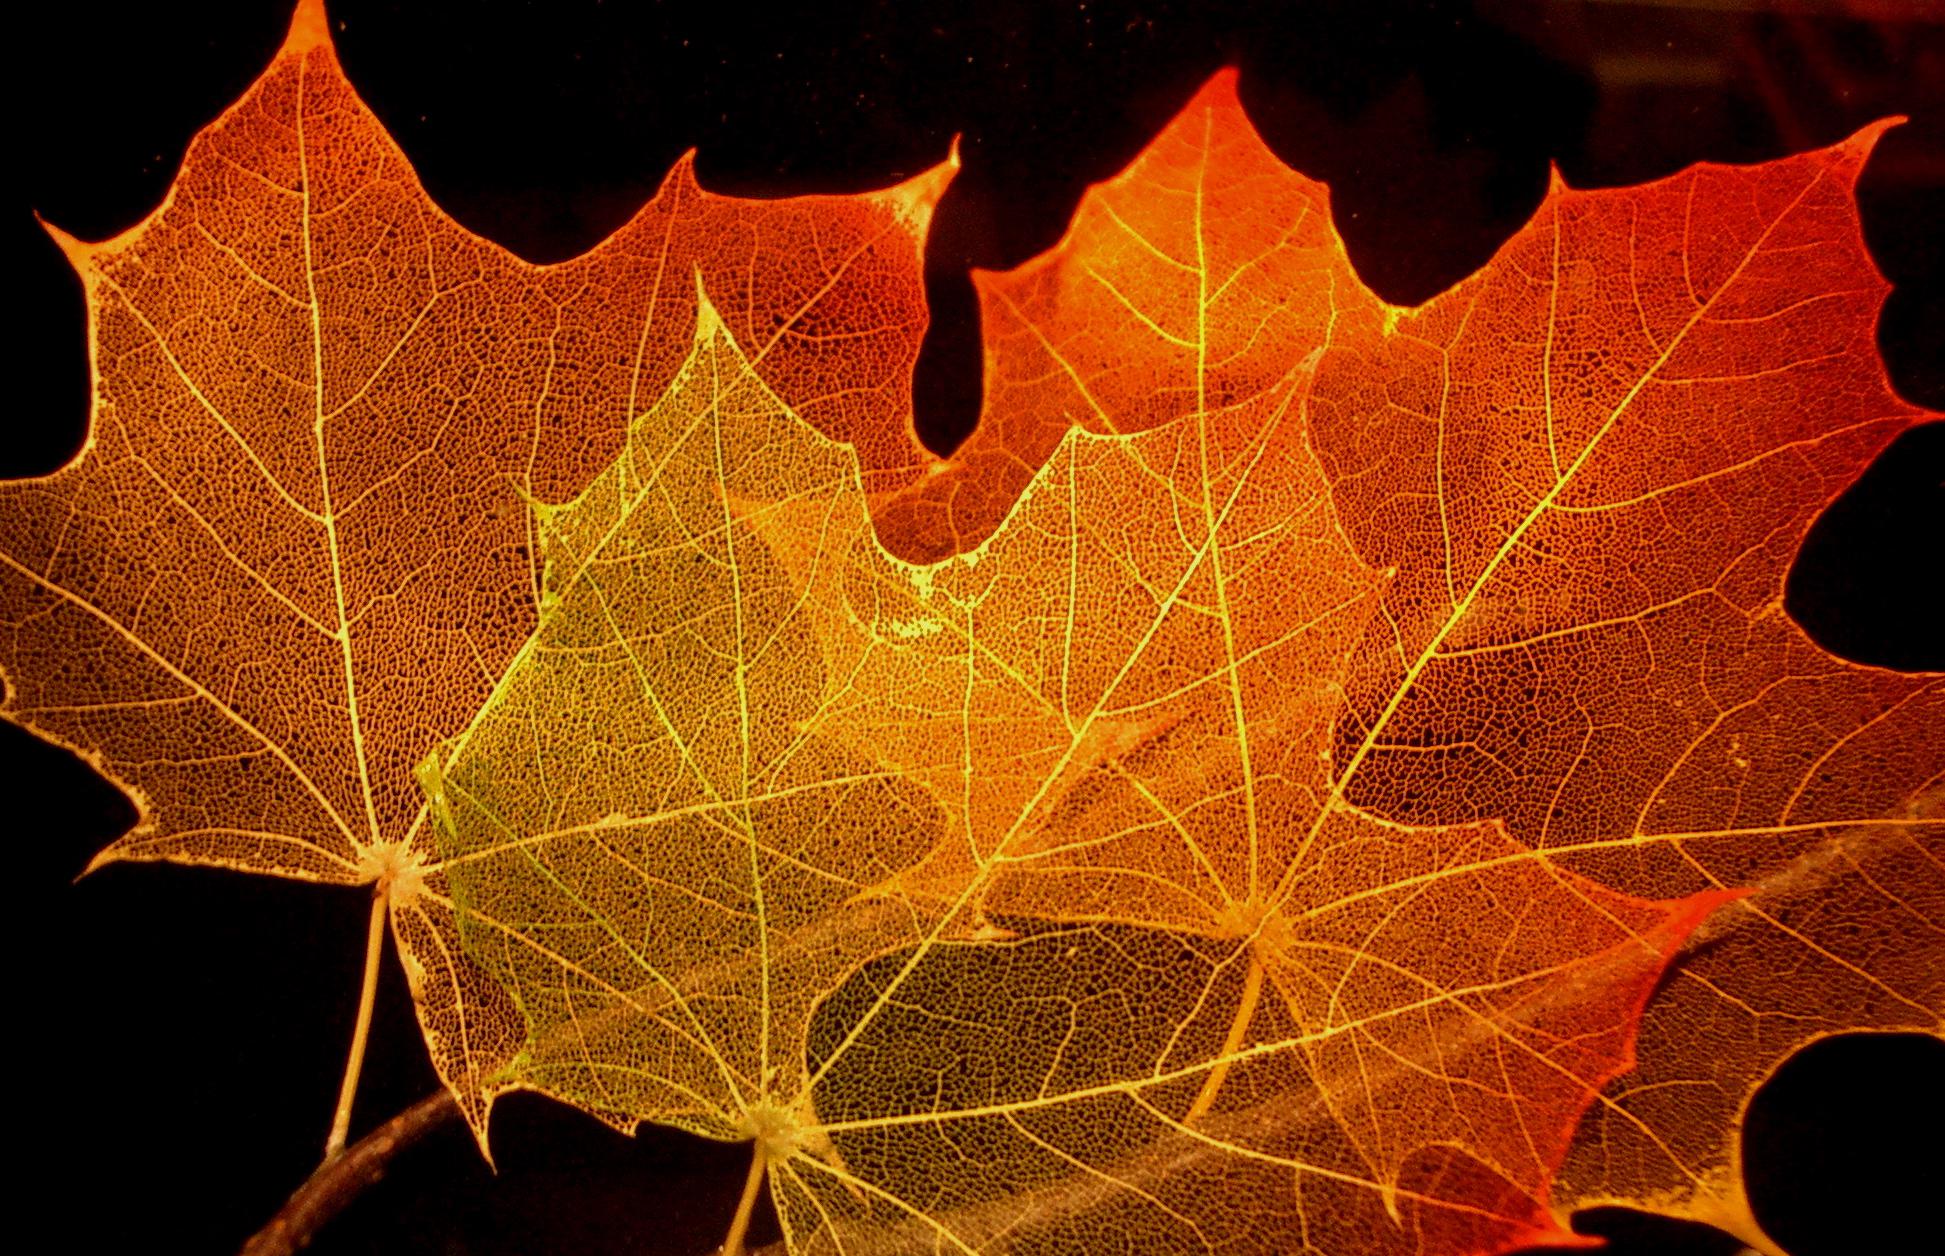 Photograph of three maple leaves showing their network of veins. The rest of the leaf has been removed with a semiconductor etch.